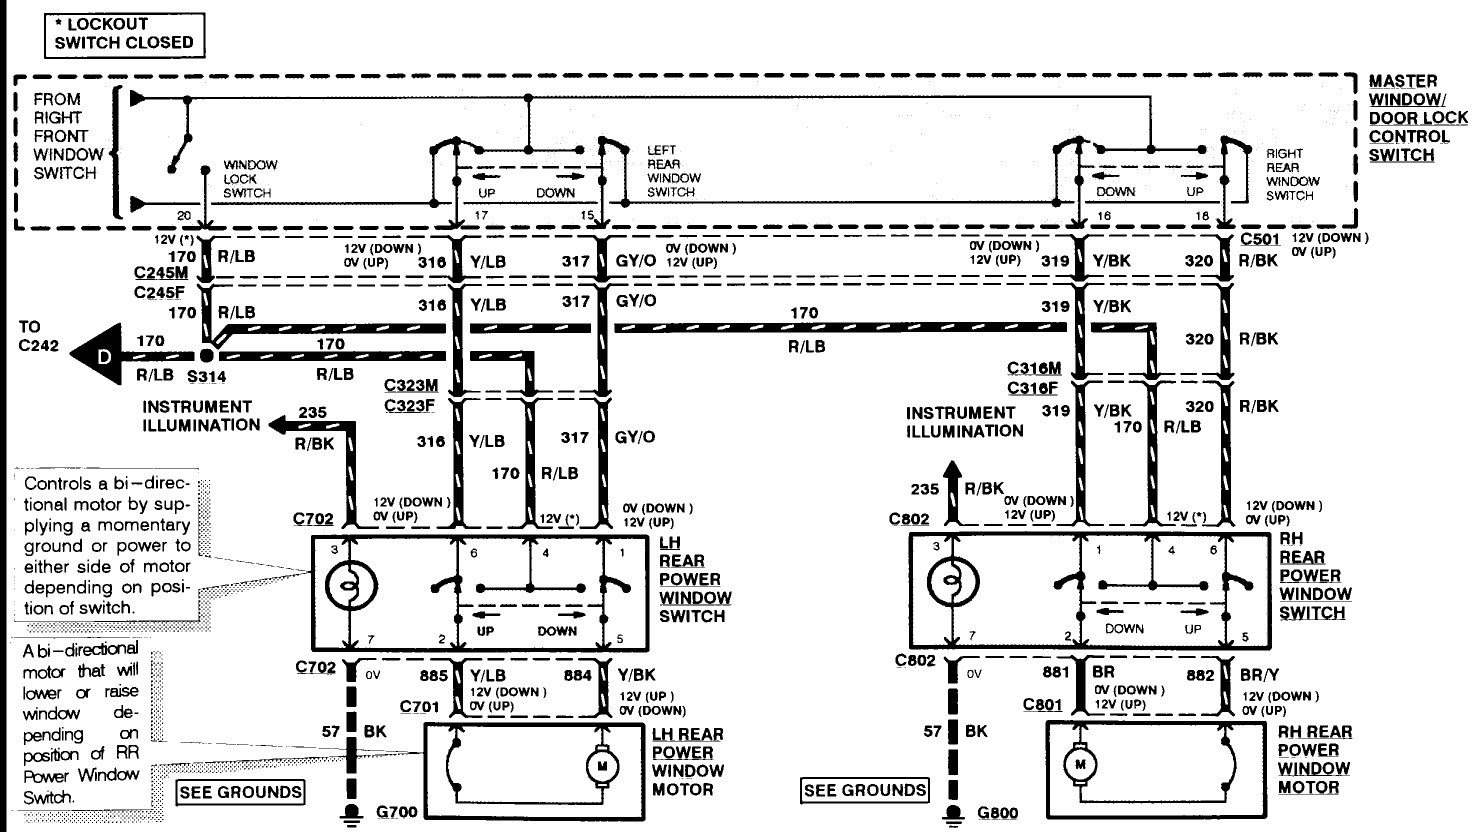 2002 Ford F150 Power Window Wiring Diagram Pdf from lh5.googleusercontent.com